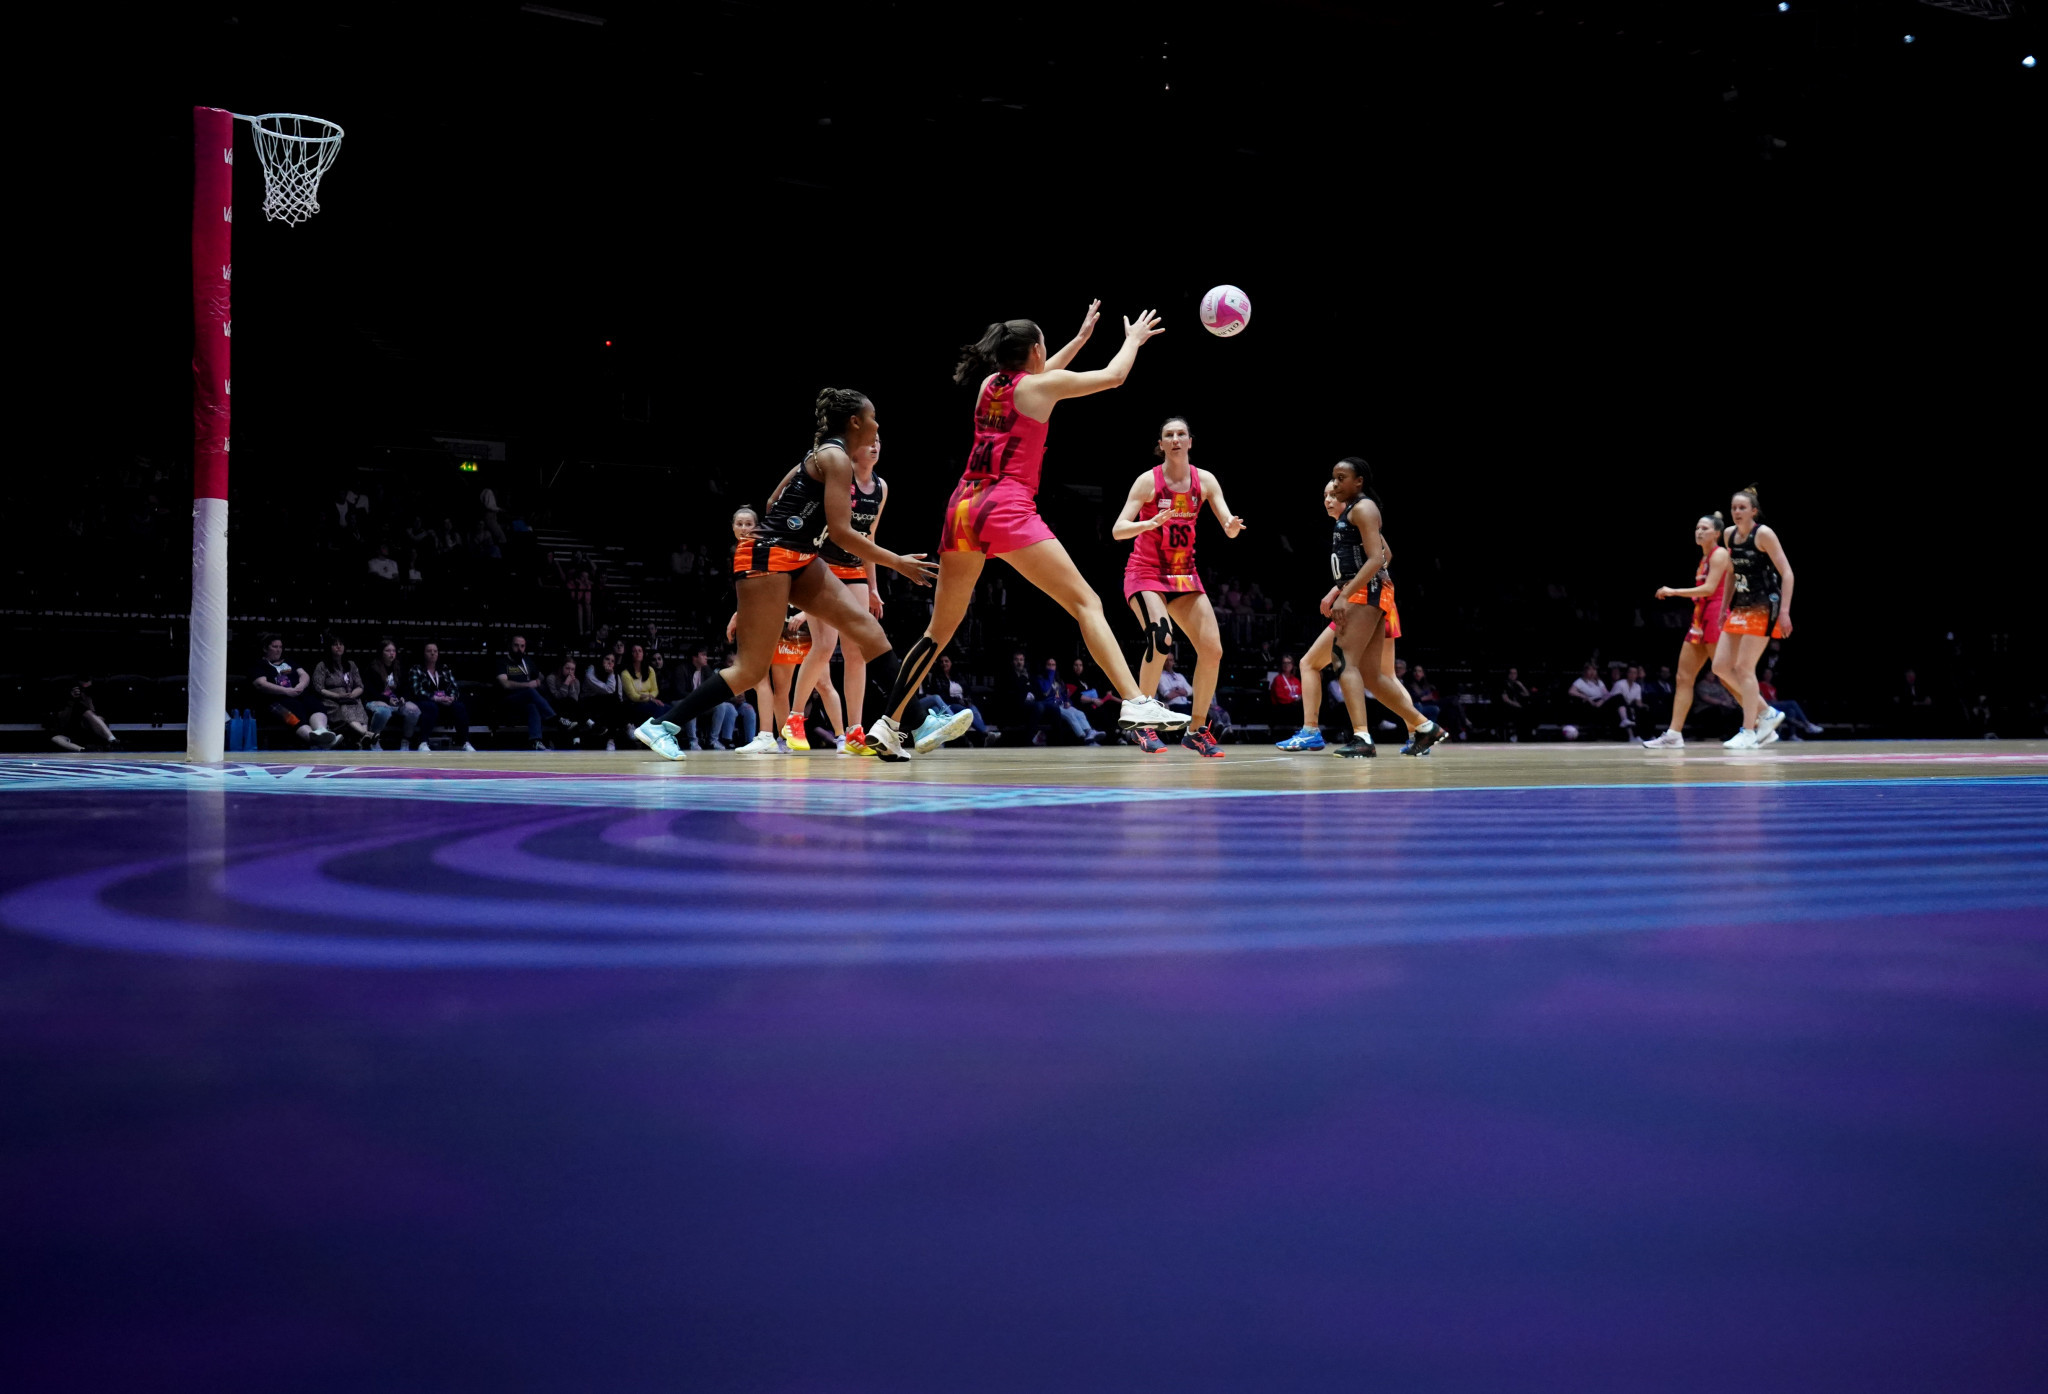 World Netball launch quest for athlete director as part of governance reform